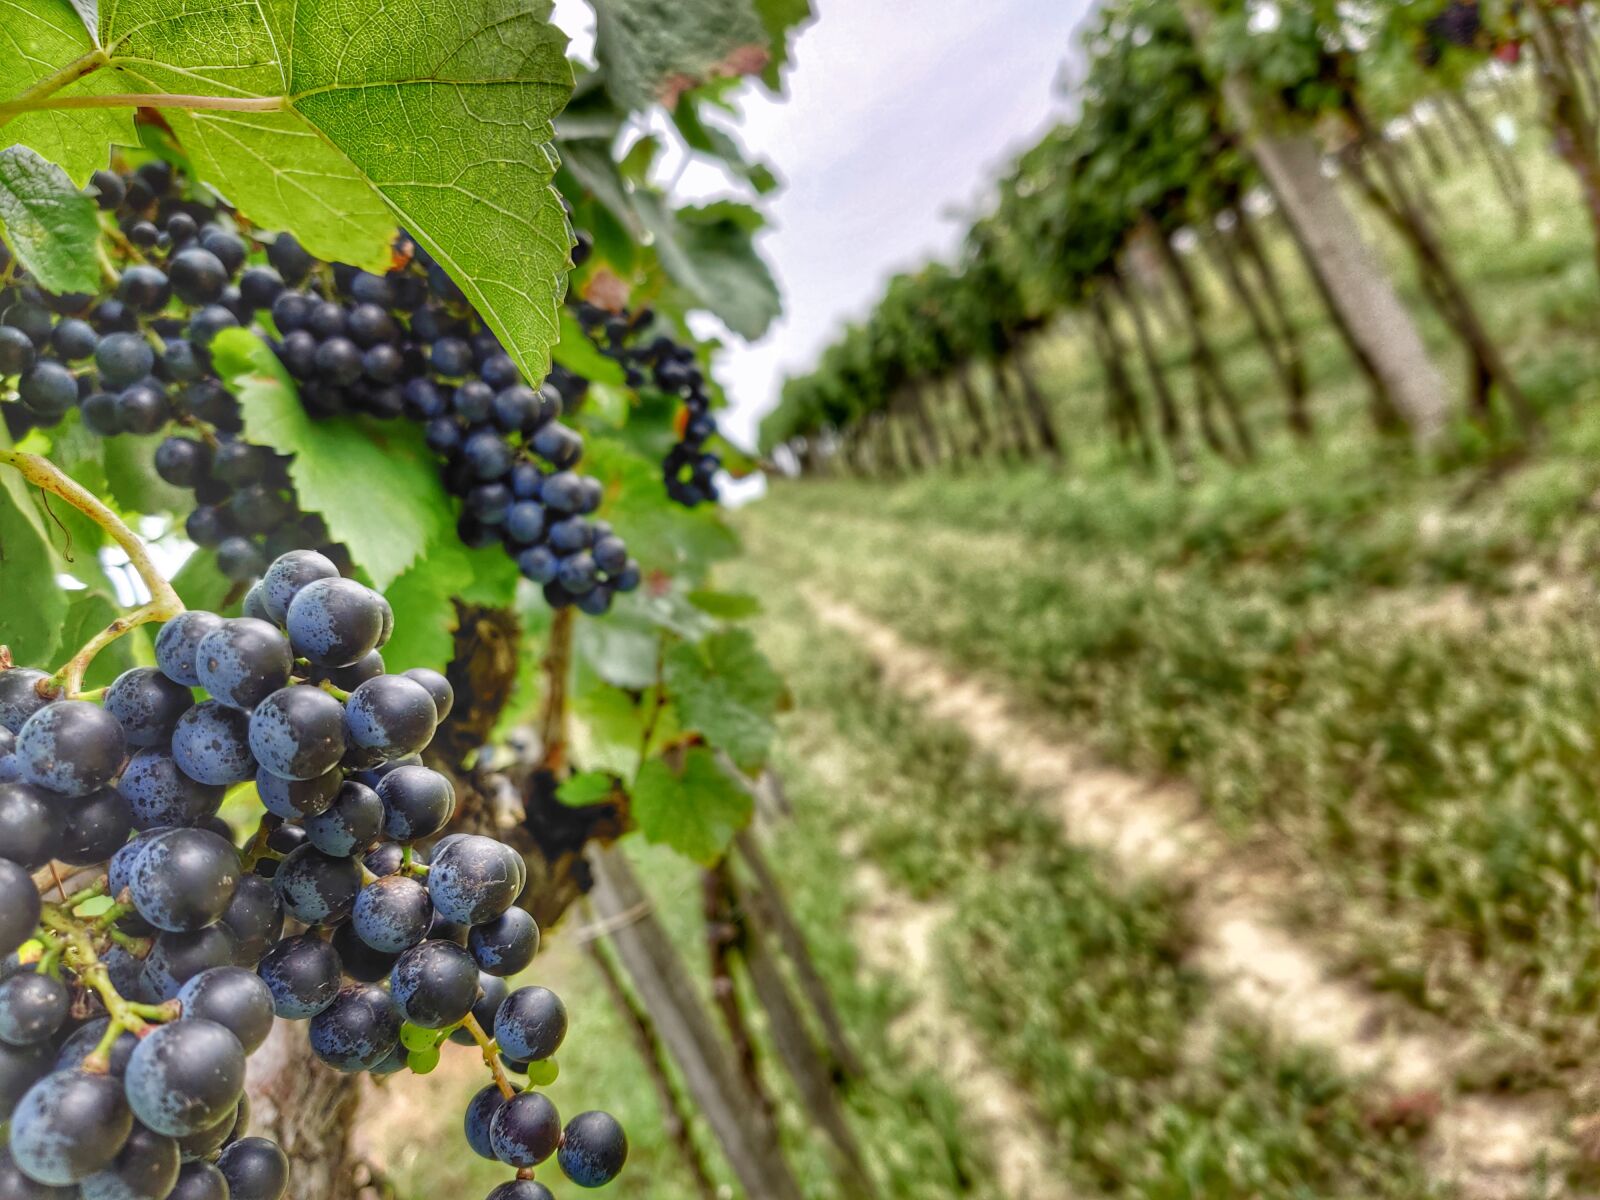 OnePlus GM1913 sample photo. Grapes, vine, field photography